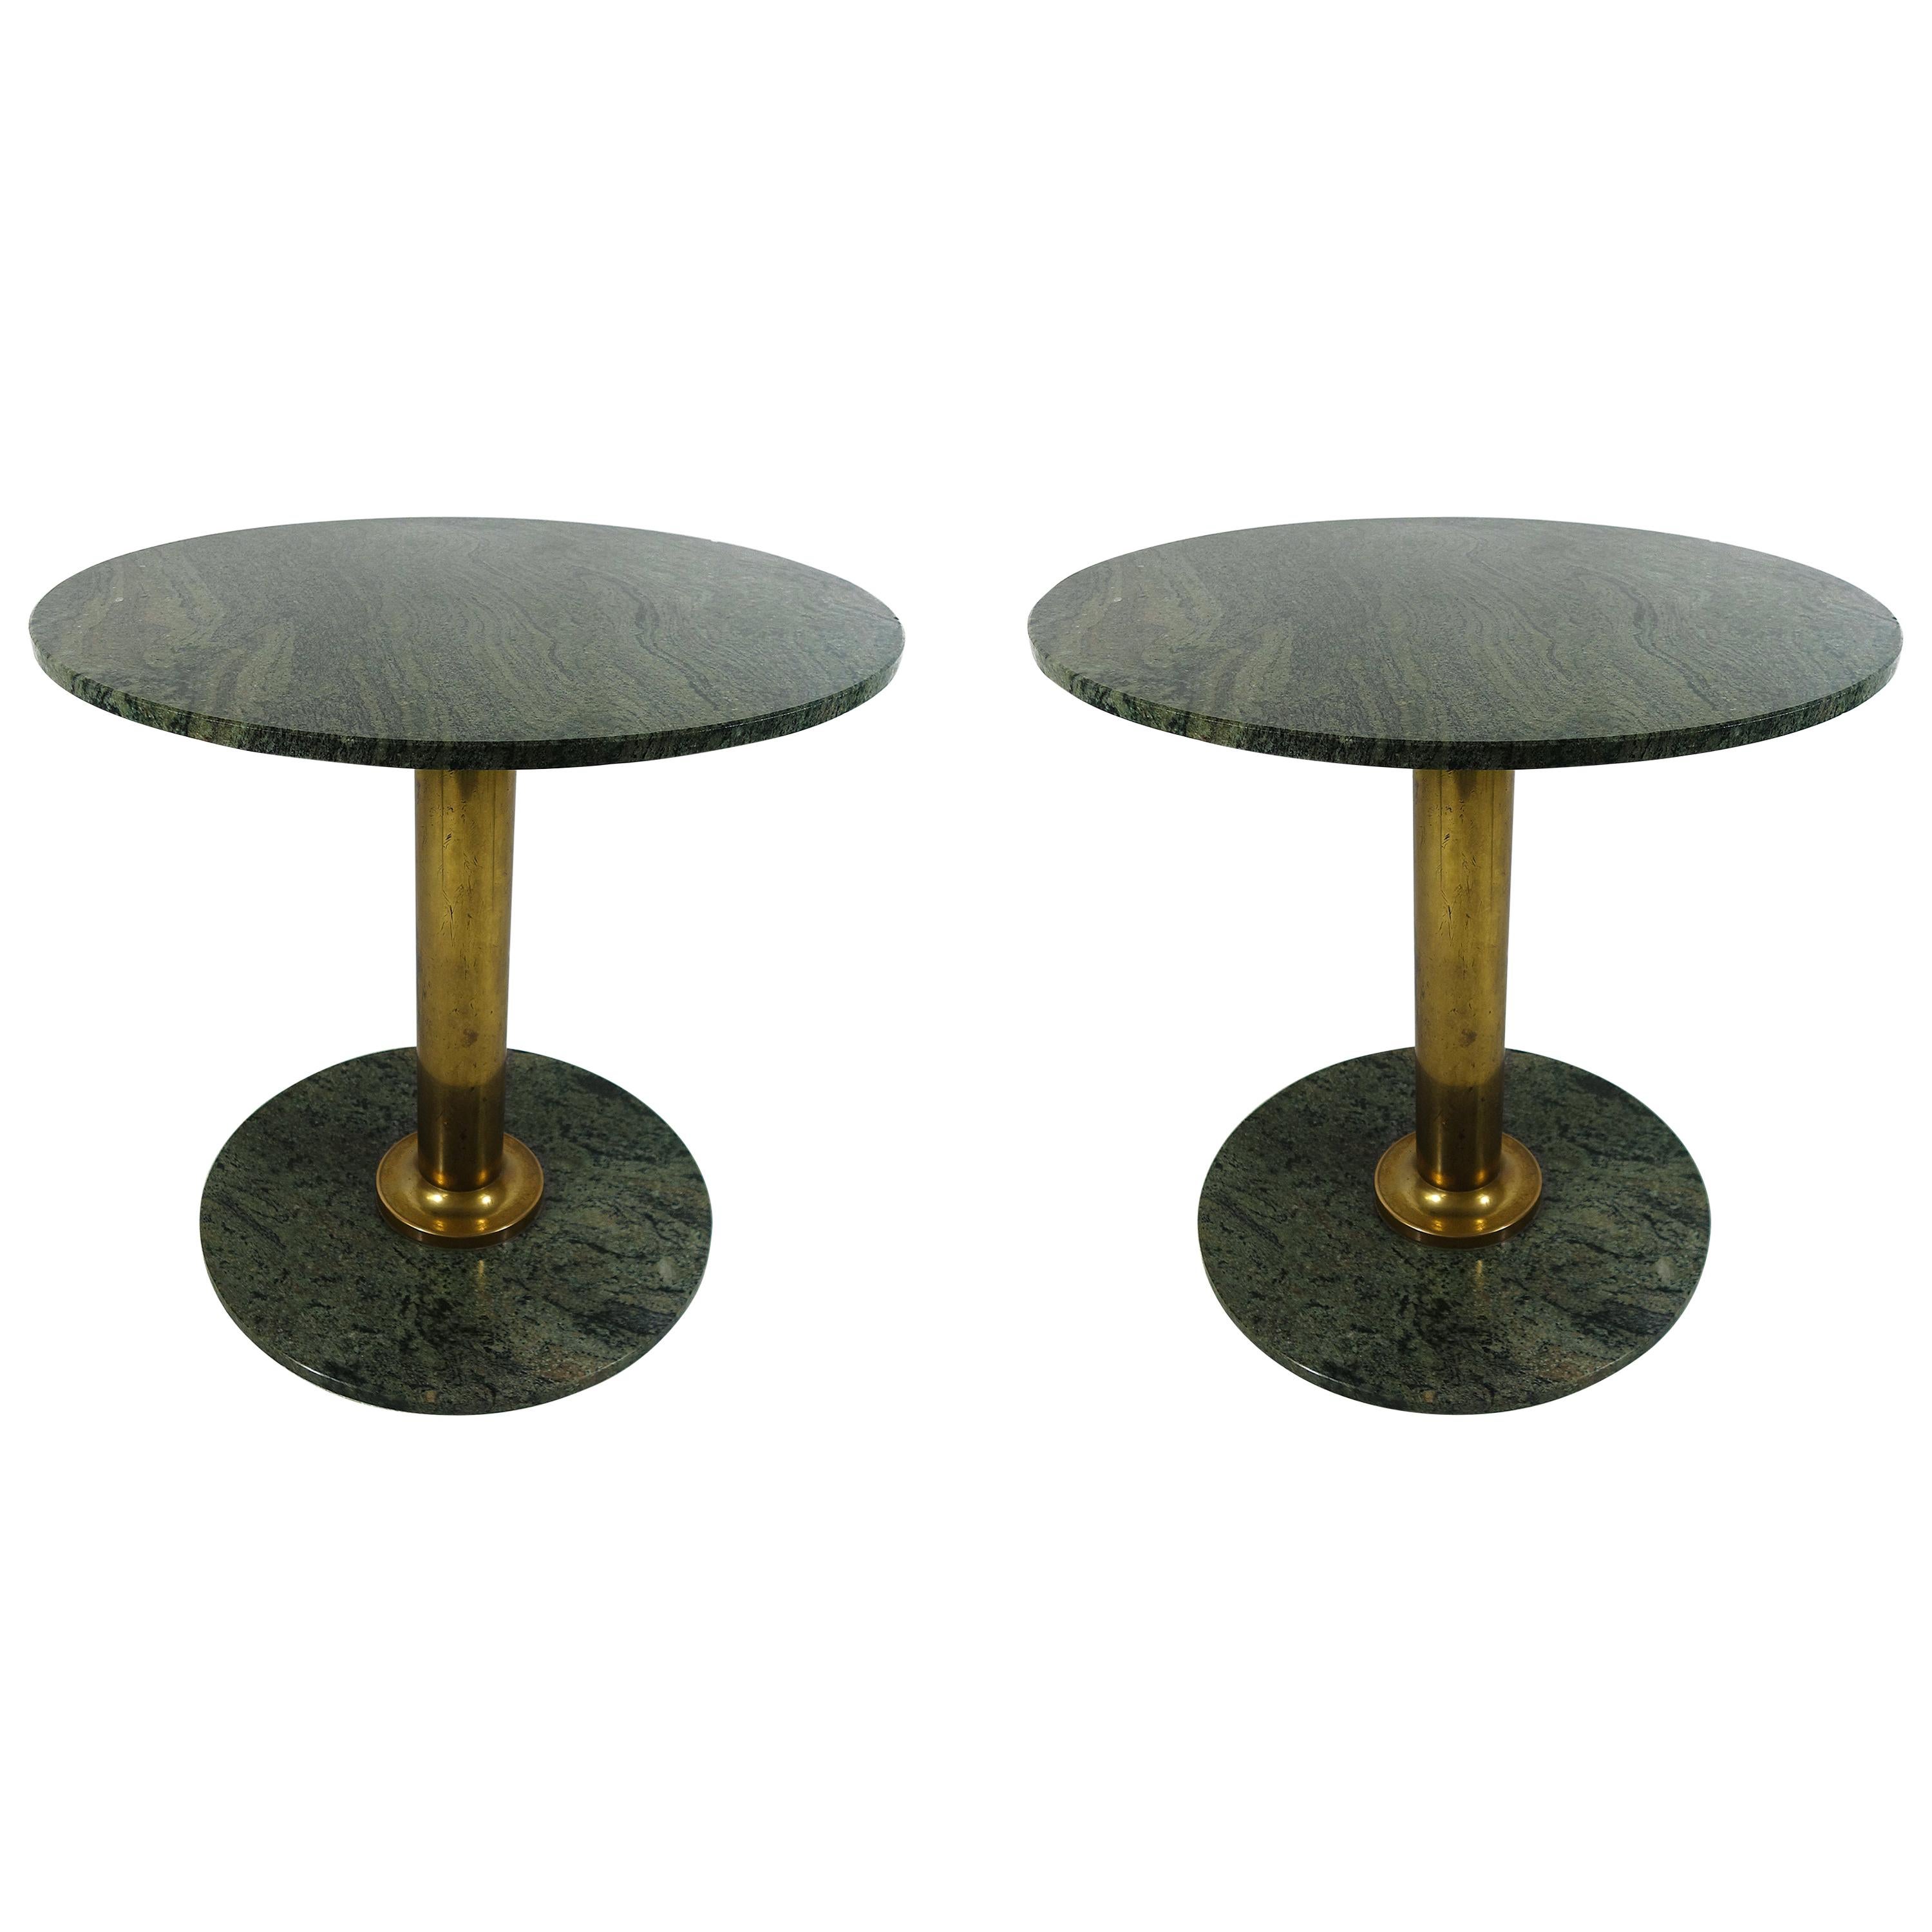 Pair of round Hollywood Regency Tables with Brass Foot and Granite Top